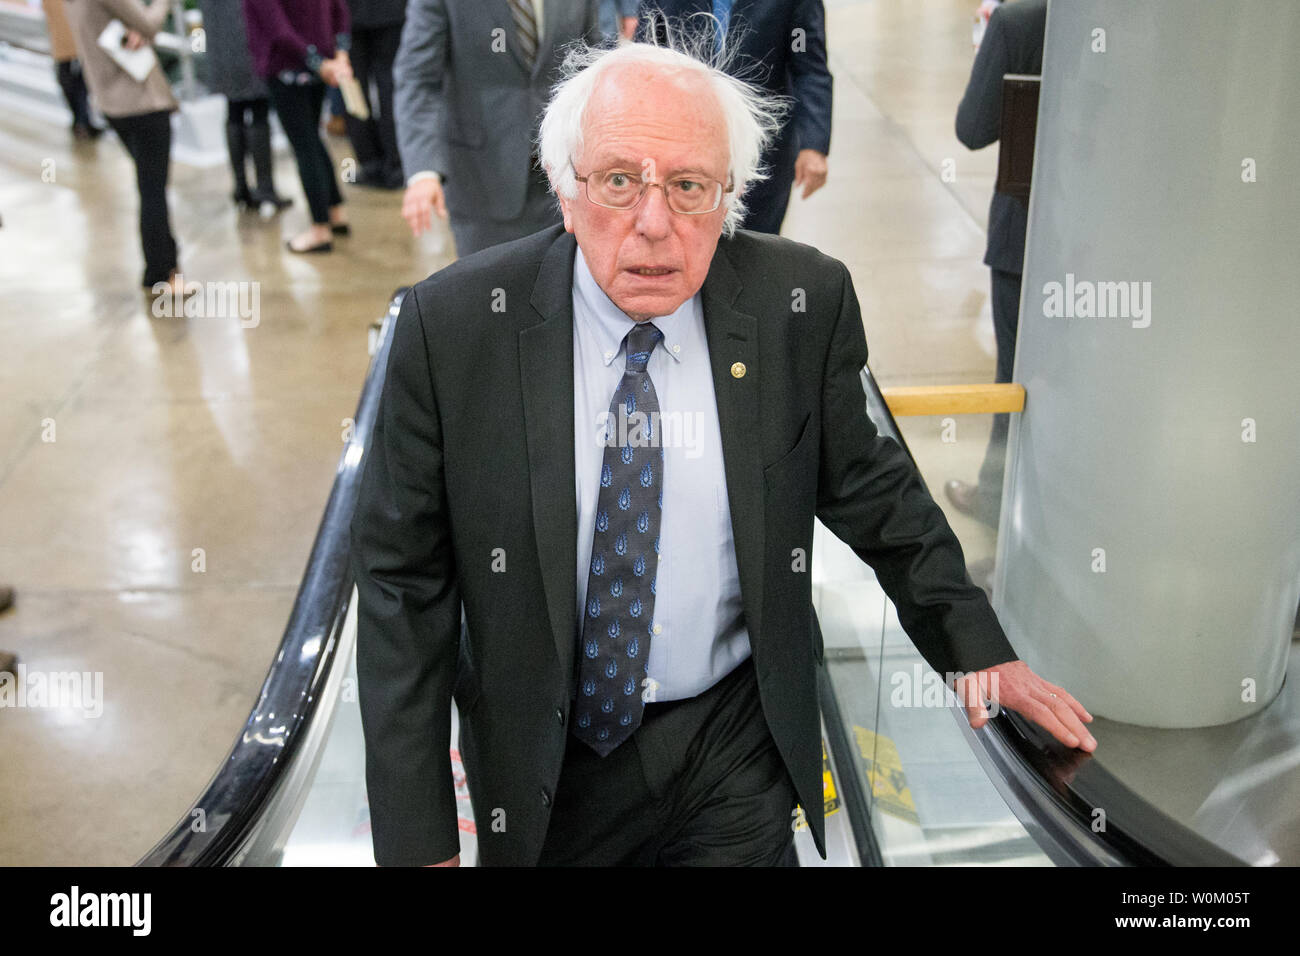 Sen. Bernie Sanders (I-VT) walks to the weekly Democratic caucus lunch on Capitol Hill in Washington, DC on December 19, 2017. The Senate is planning to vote on the tax bill this evening.     Photo by Erin Schaff/UPI. Stock Photo